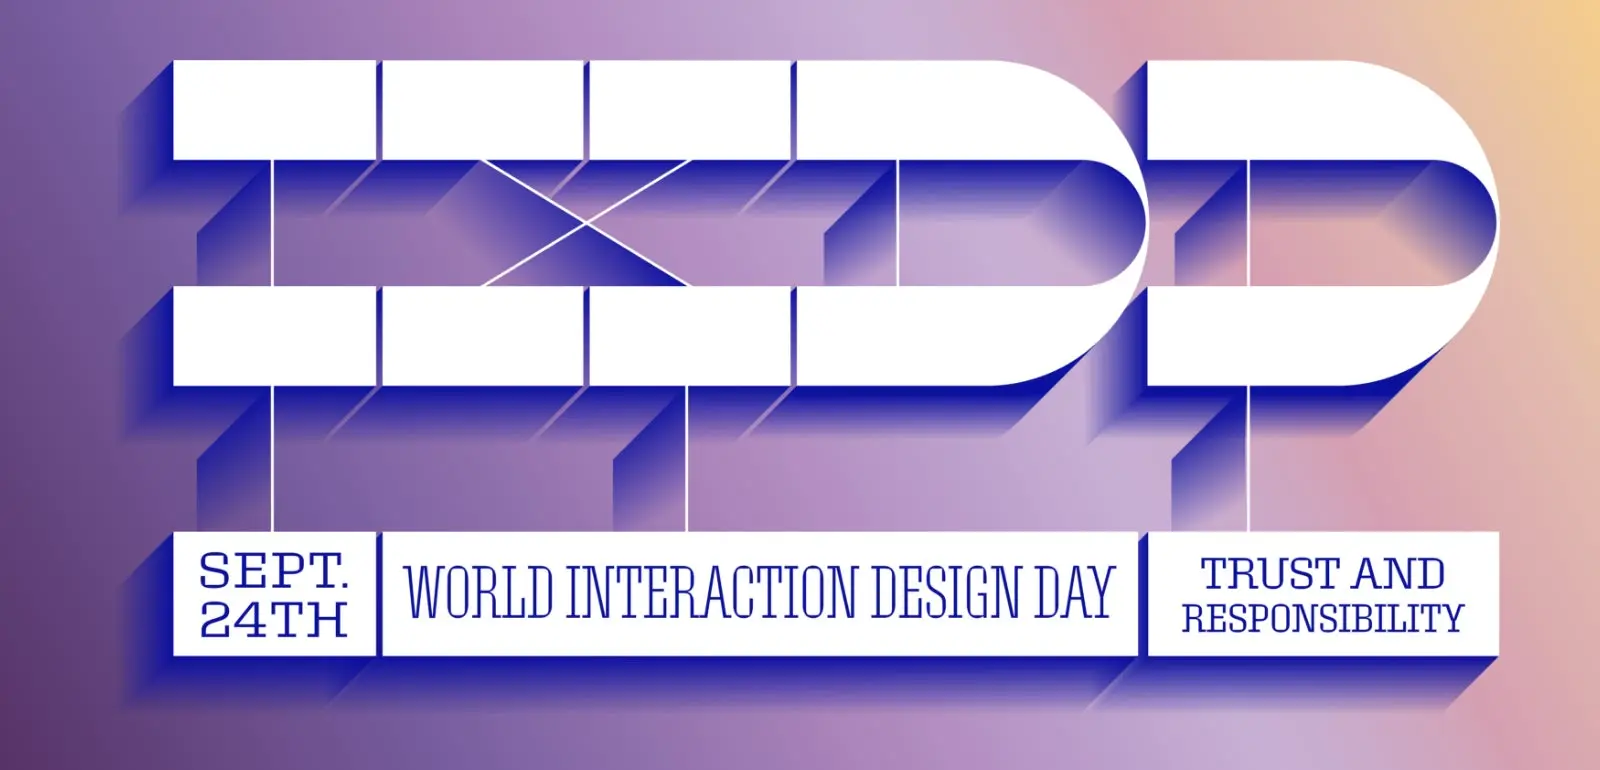 Img Alt: Cover image for the World Interaction Design Day event hosted by Adobe on September 24, 2019.